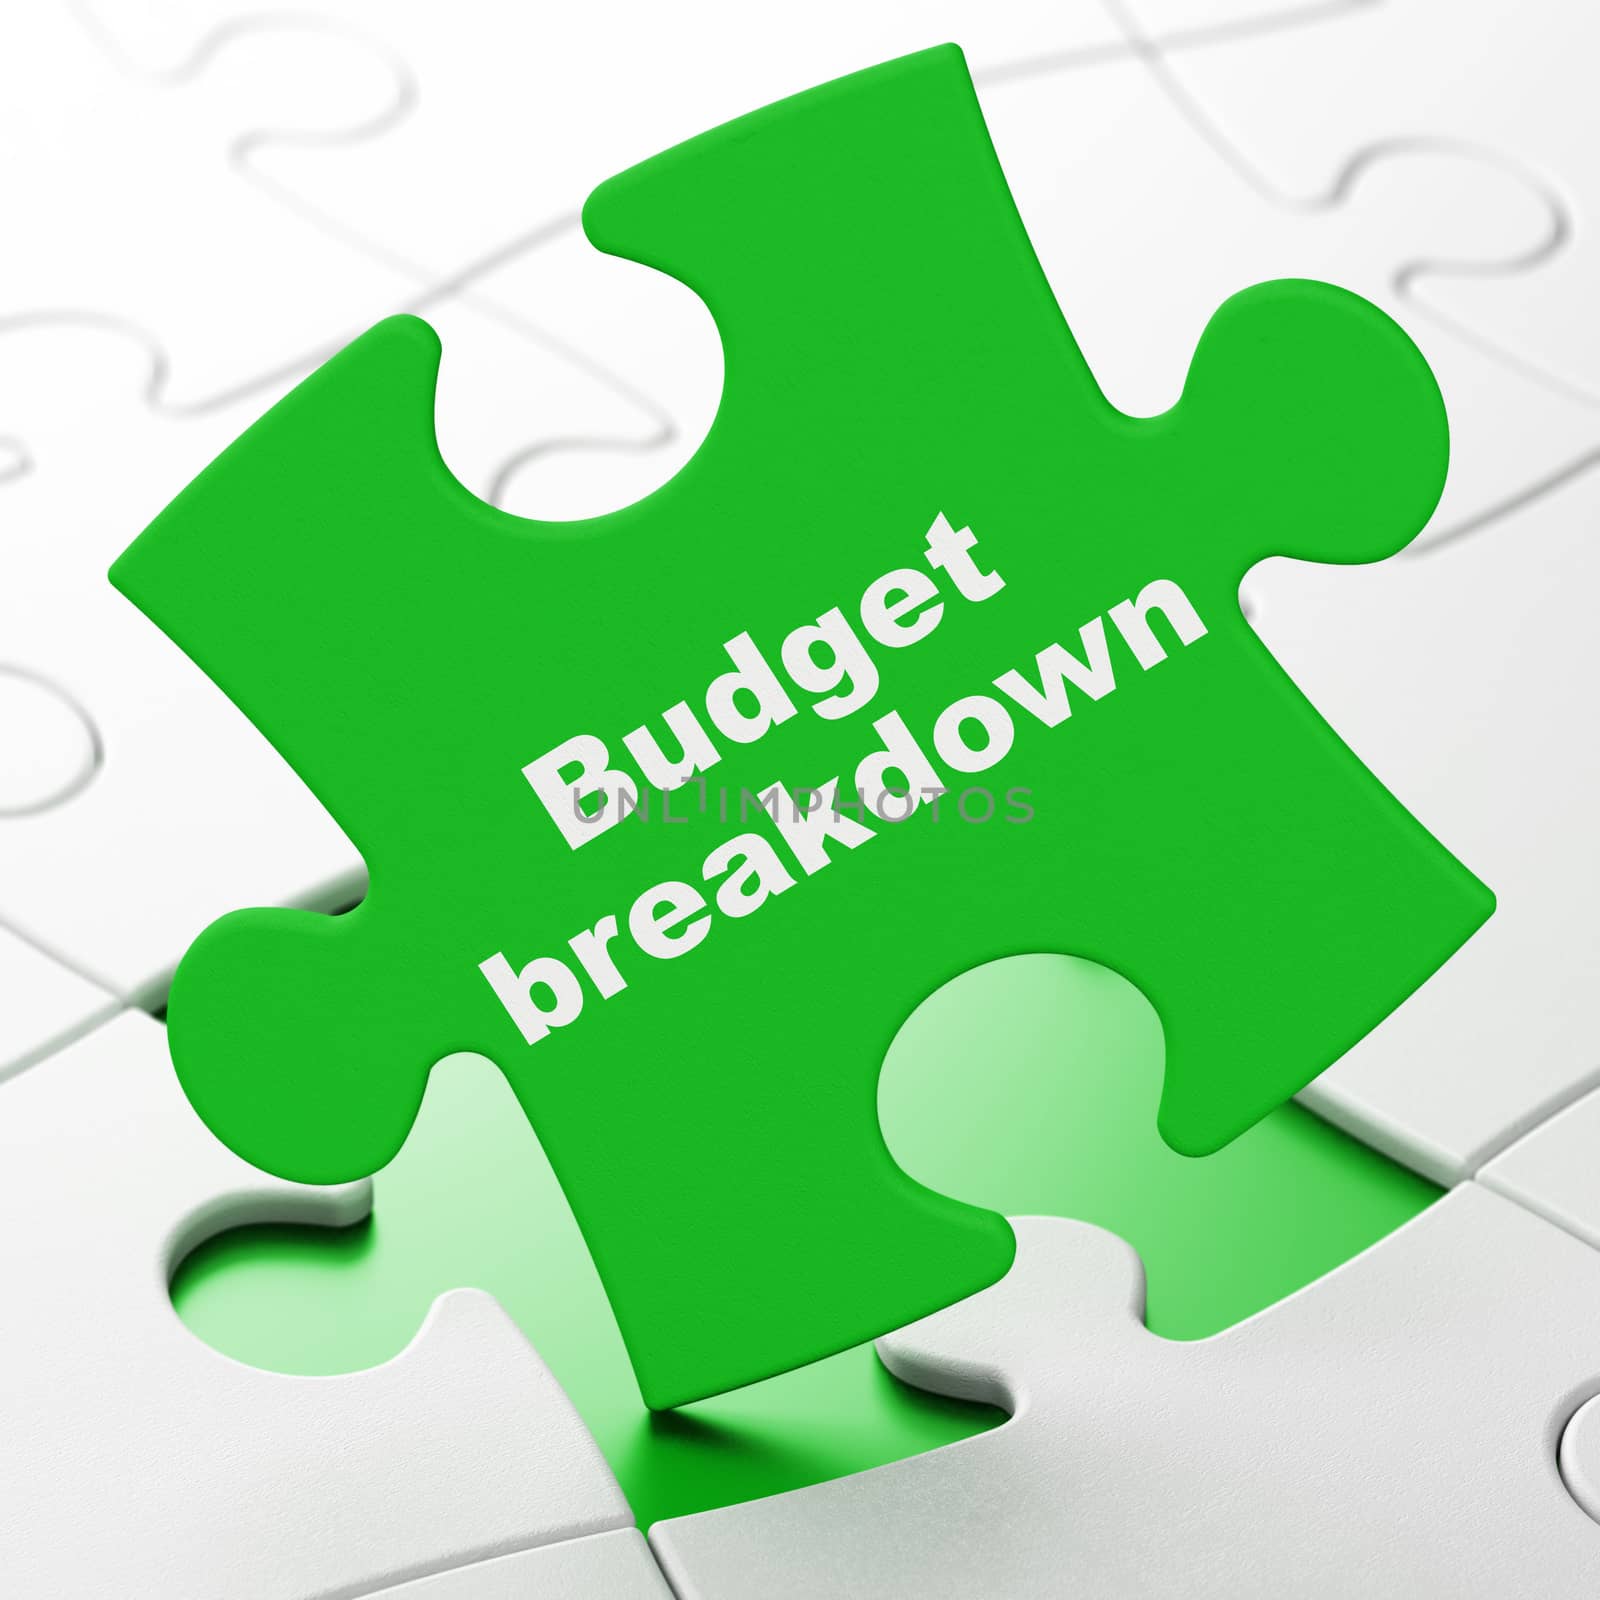 Finance concept: Budget Breakdown on Green puzzle pieces background, 3d render